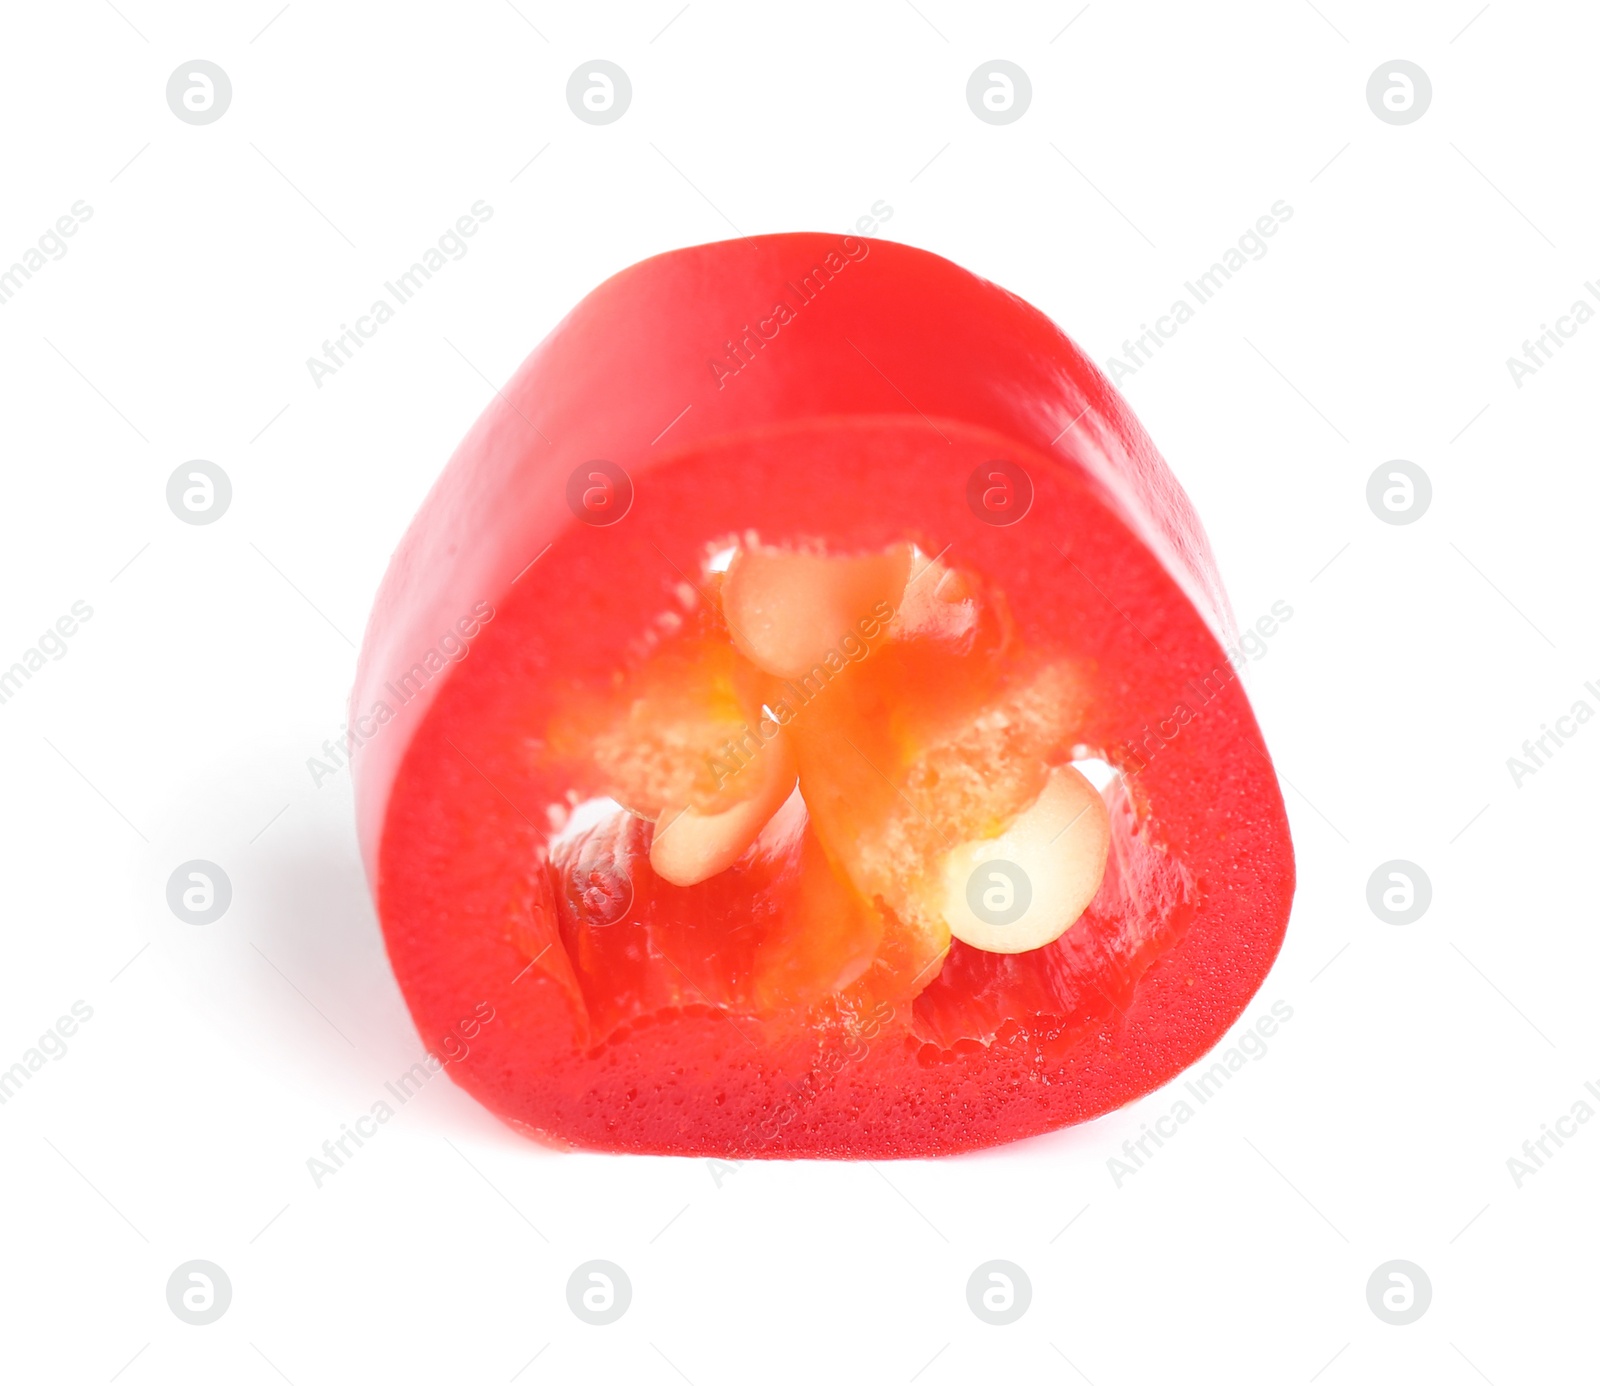 Photo of Slice of red chili pepper isolated on white